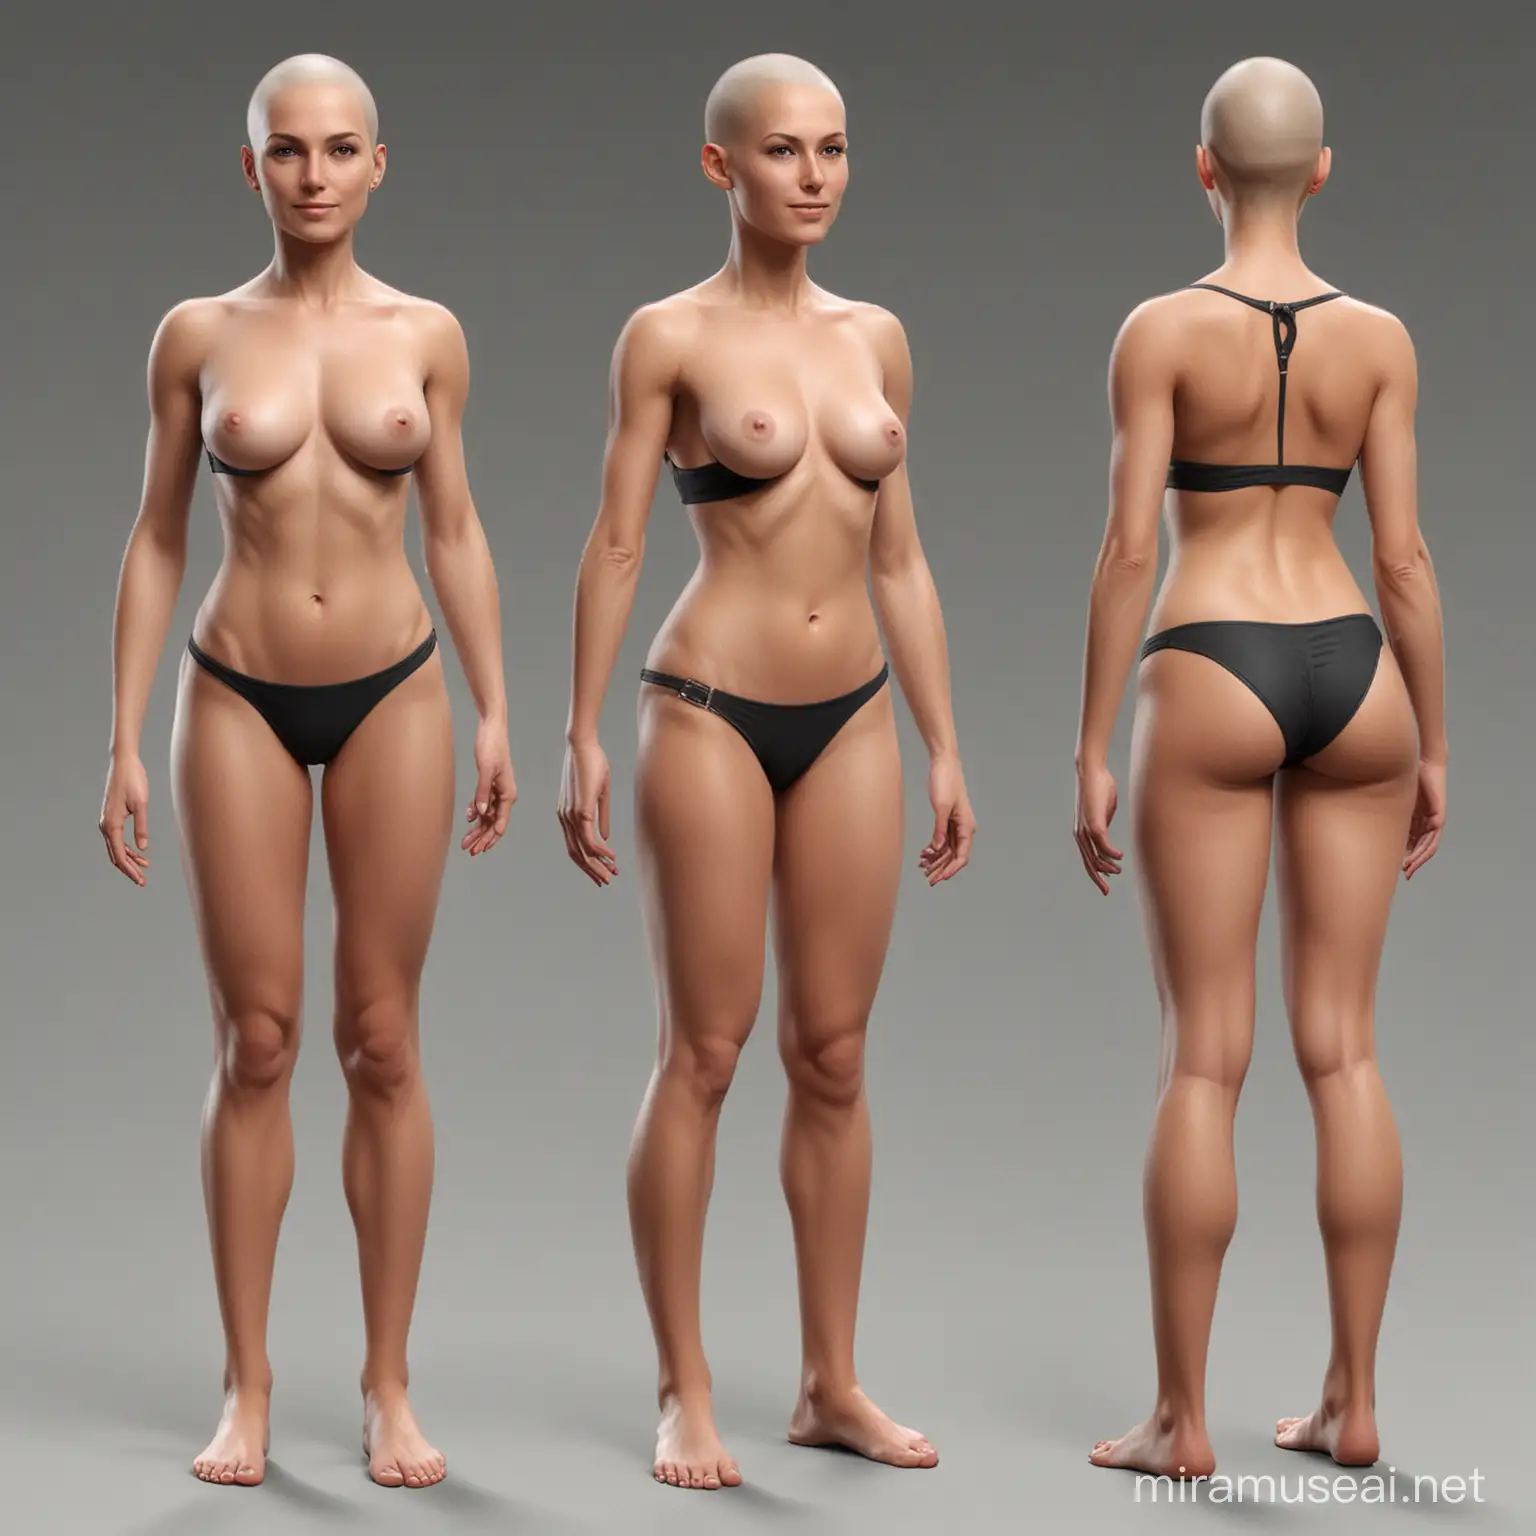 character sheet, orthographic, modeling reference, woman, no hair, full body, front view, side view, no shadows